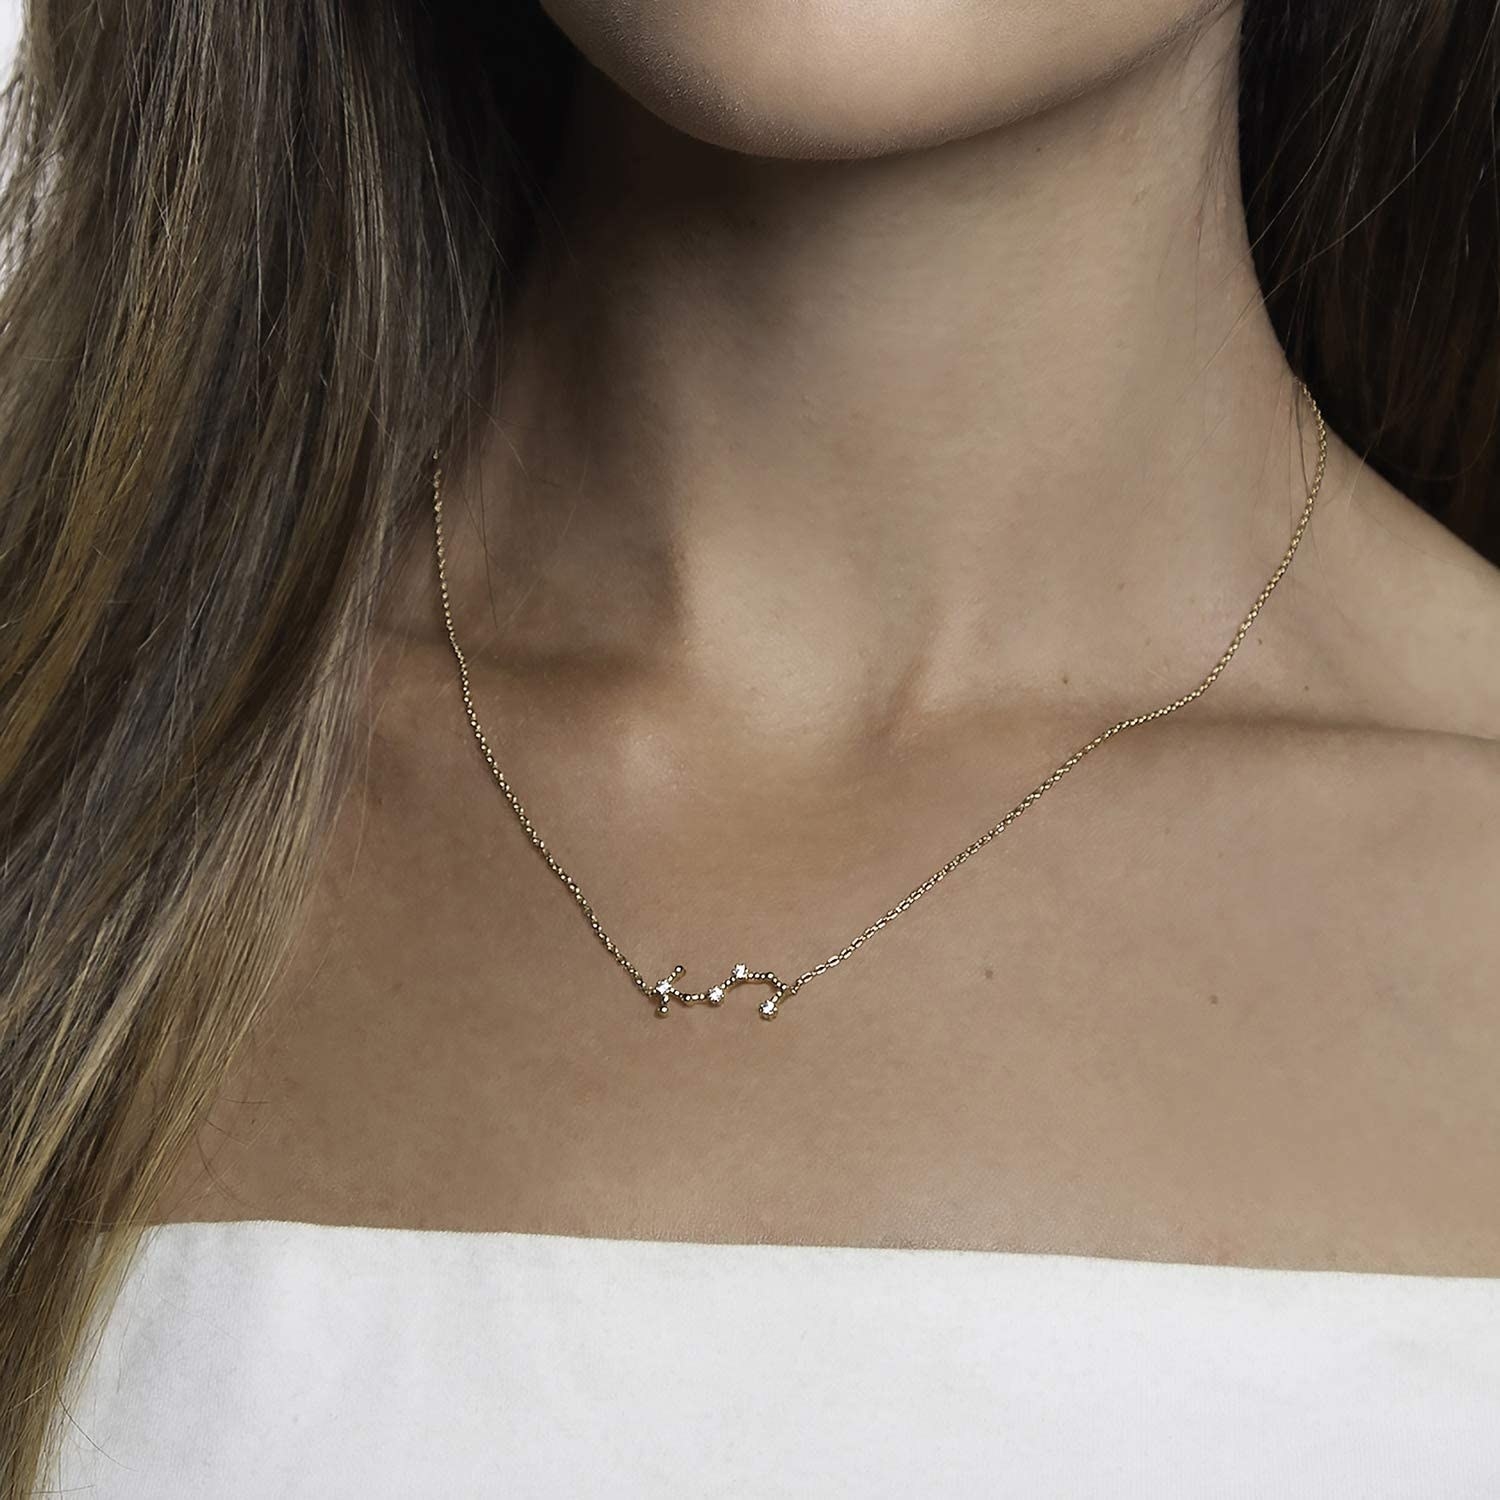 Model wearing the gold and rhinestone necklace in the shape of the Scorpio constellation